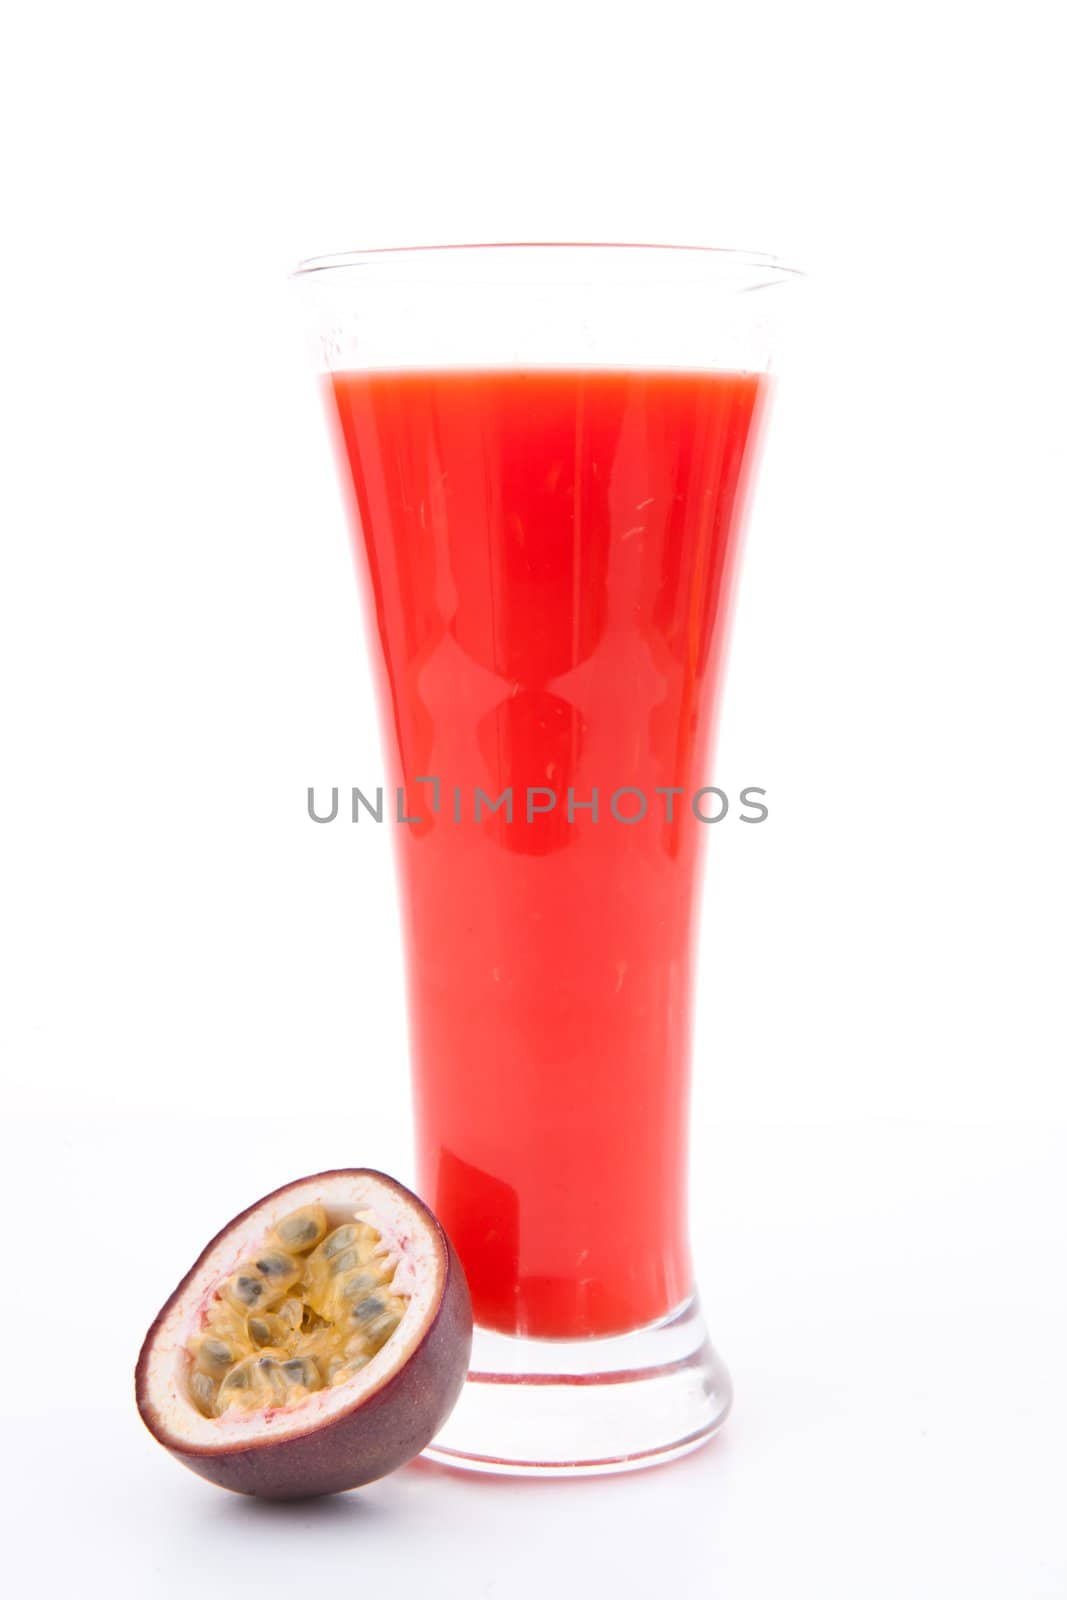 Full glass of berries juice near a passion fruit against white background